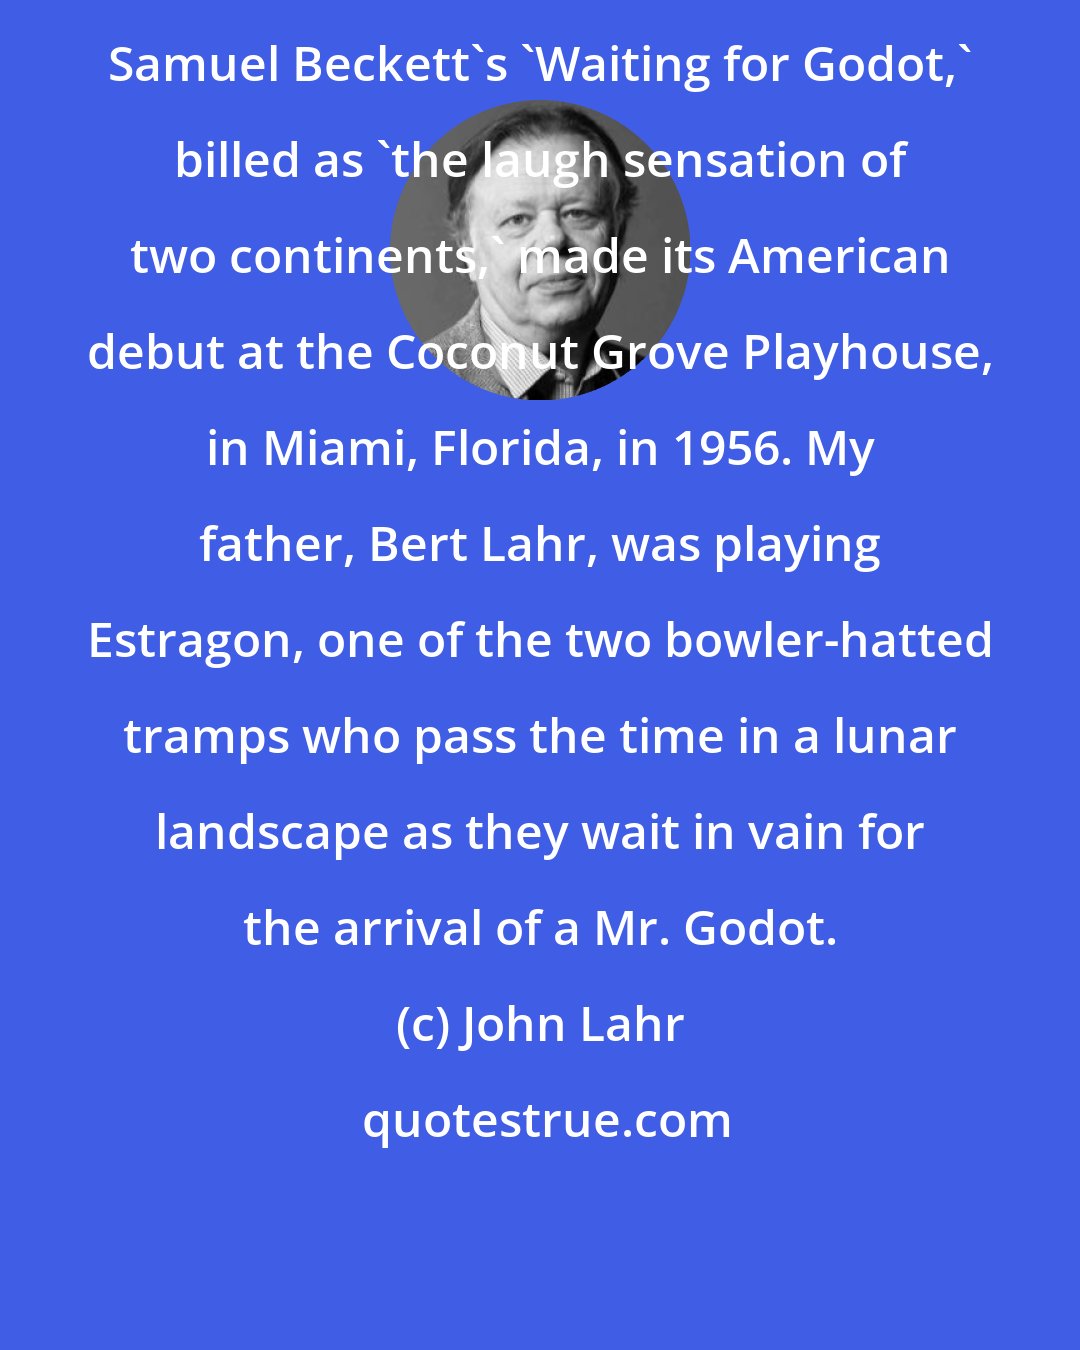 John Lahr: Samuel Beckett's 'Waiting for Godot,' billed as 'the laugh sensation of two continents,' made its American debut at the Coconut Grove Playhouse, in Miami, Florida, in 1956. My father, Bert Lahr, was playing Estragon, one of the two bowler-hatted tramps who pass the time in a lunar landscape as they wait in vain for the arrival of a Mr. Godot.